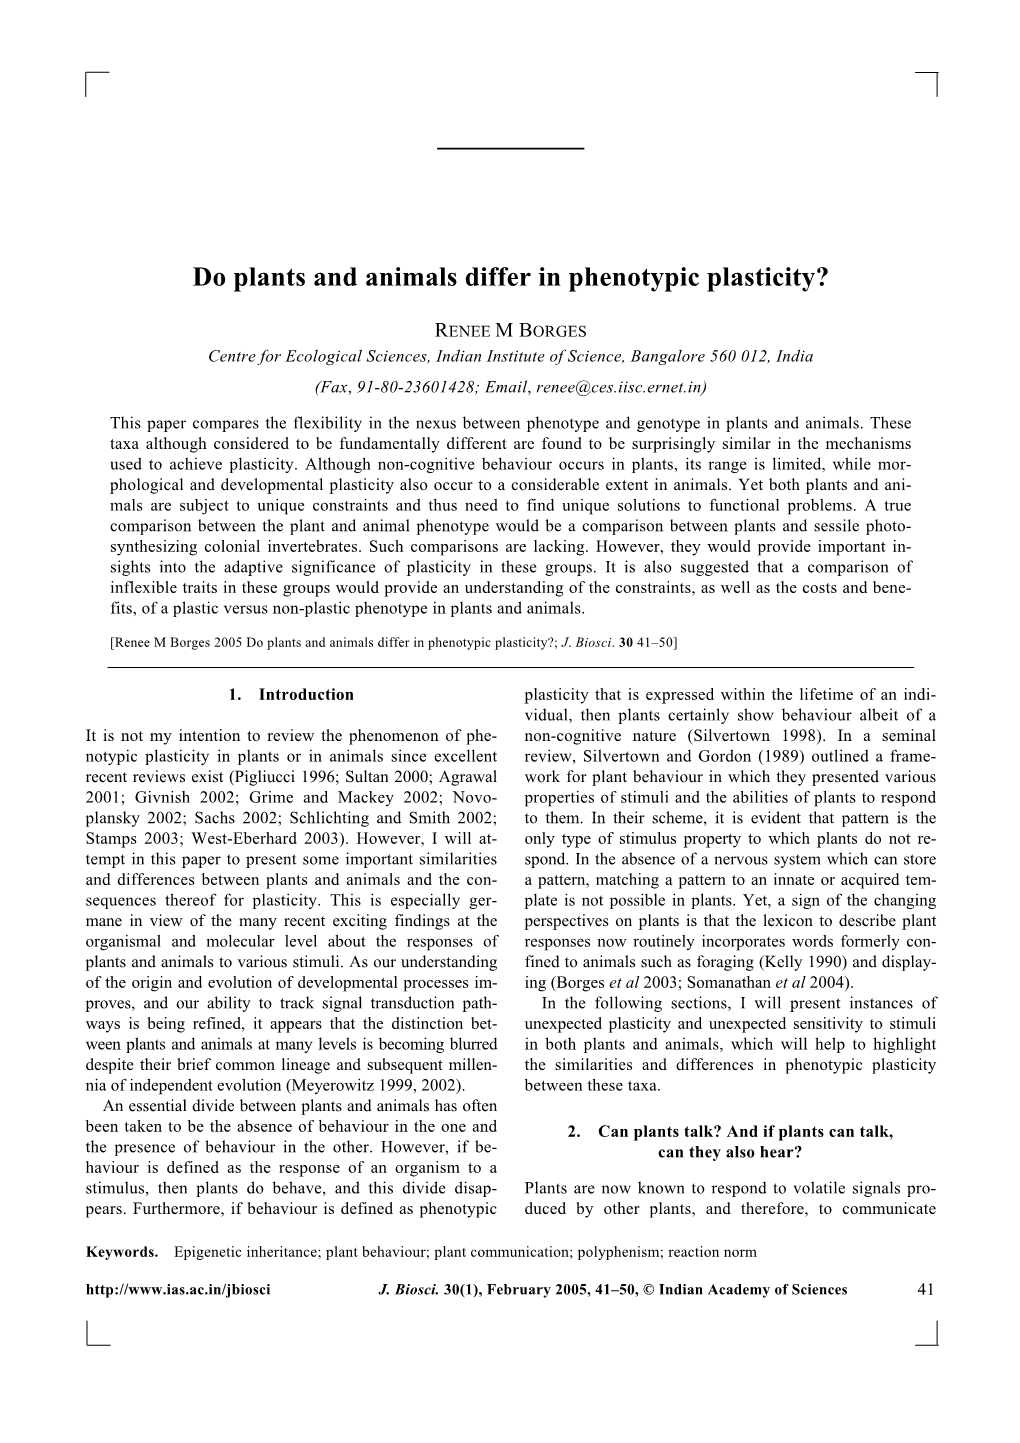 Do Plants and Animals Differ in Phenotypic Plasticity?